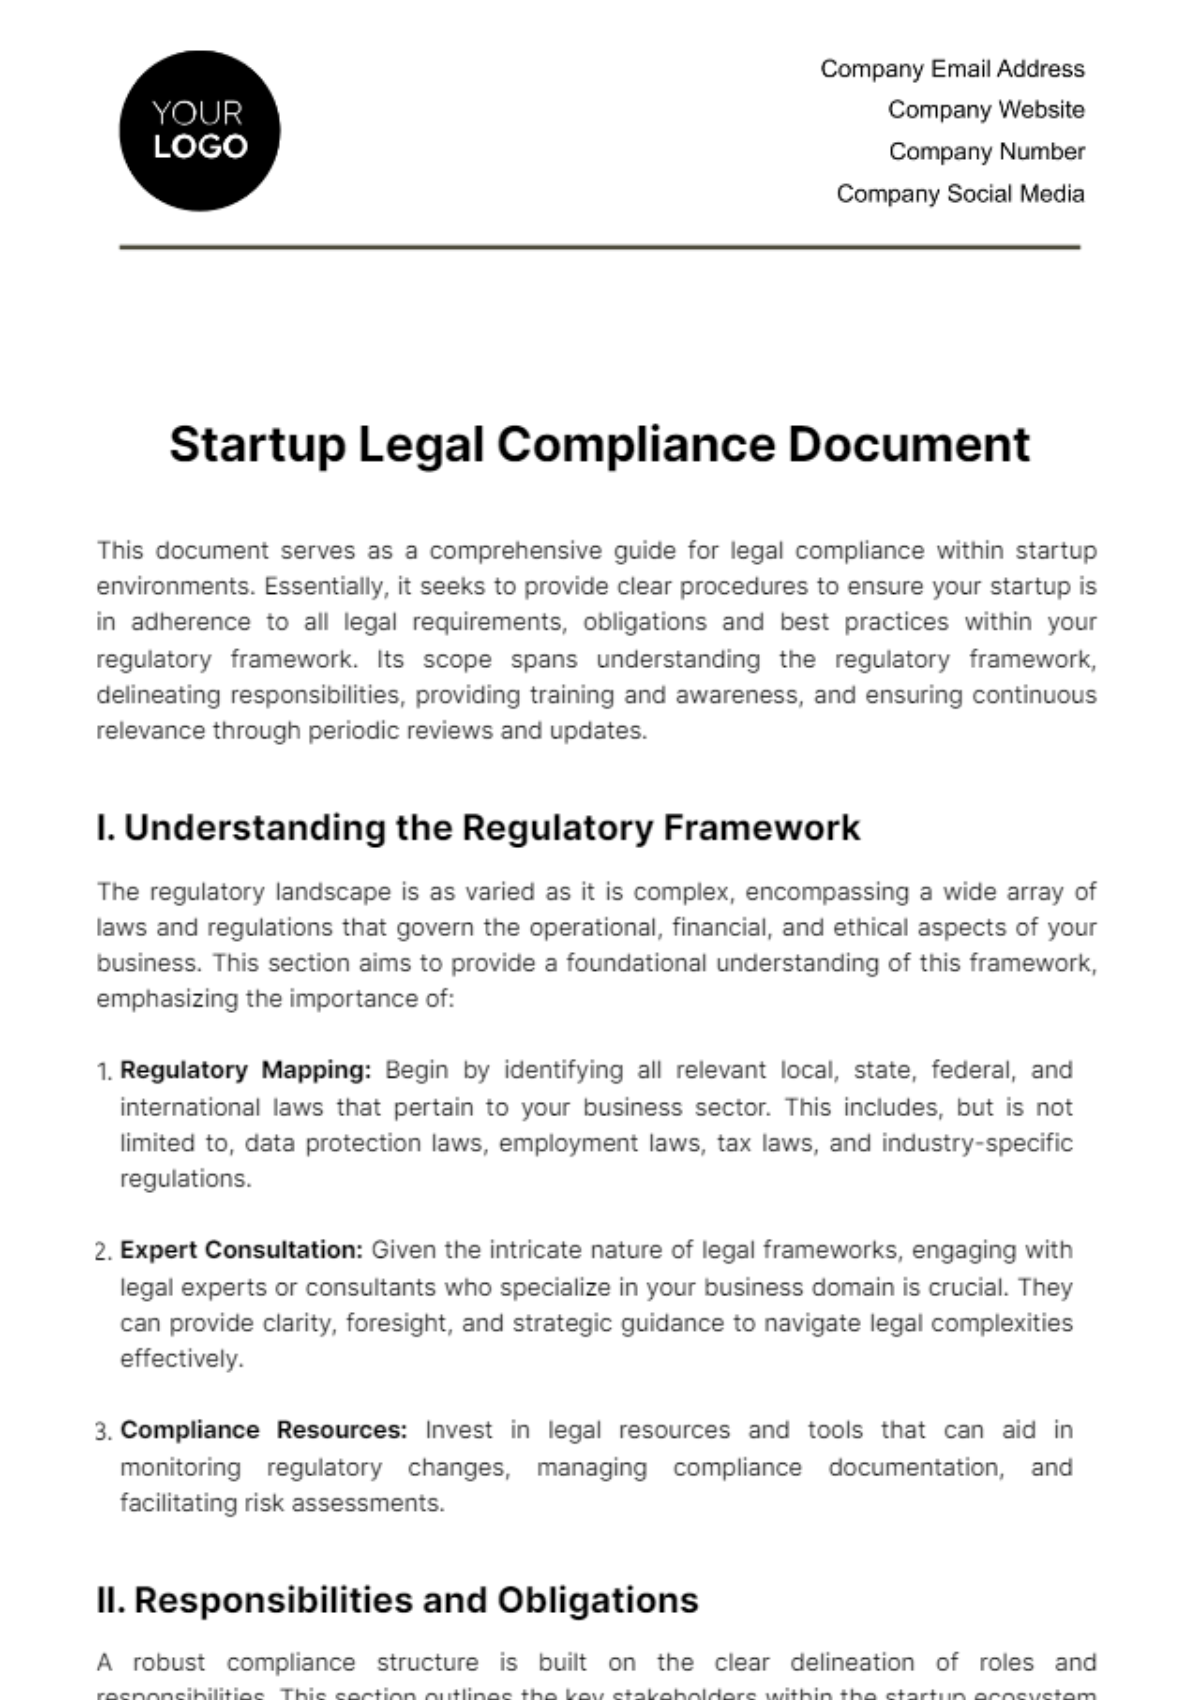 Free Startup Legal Compliance Document Template